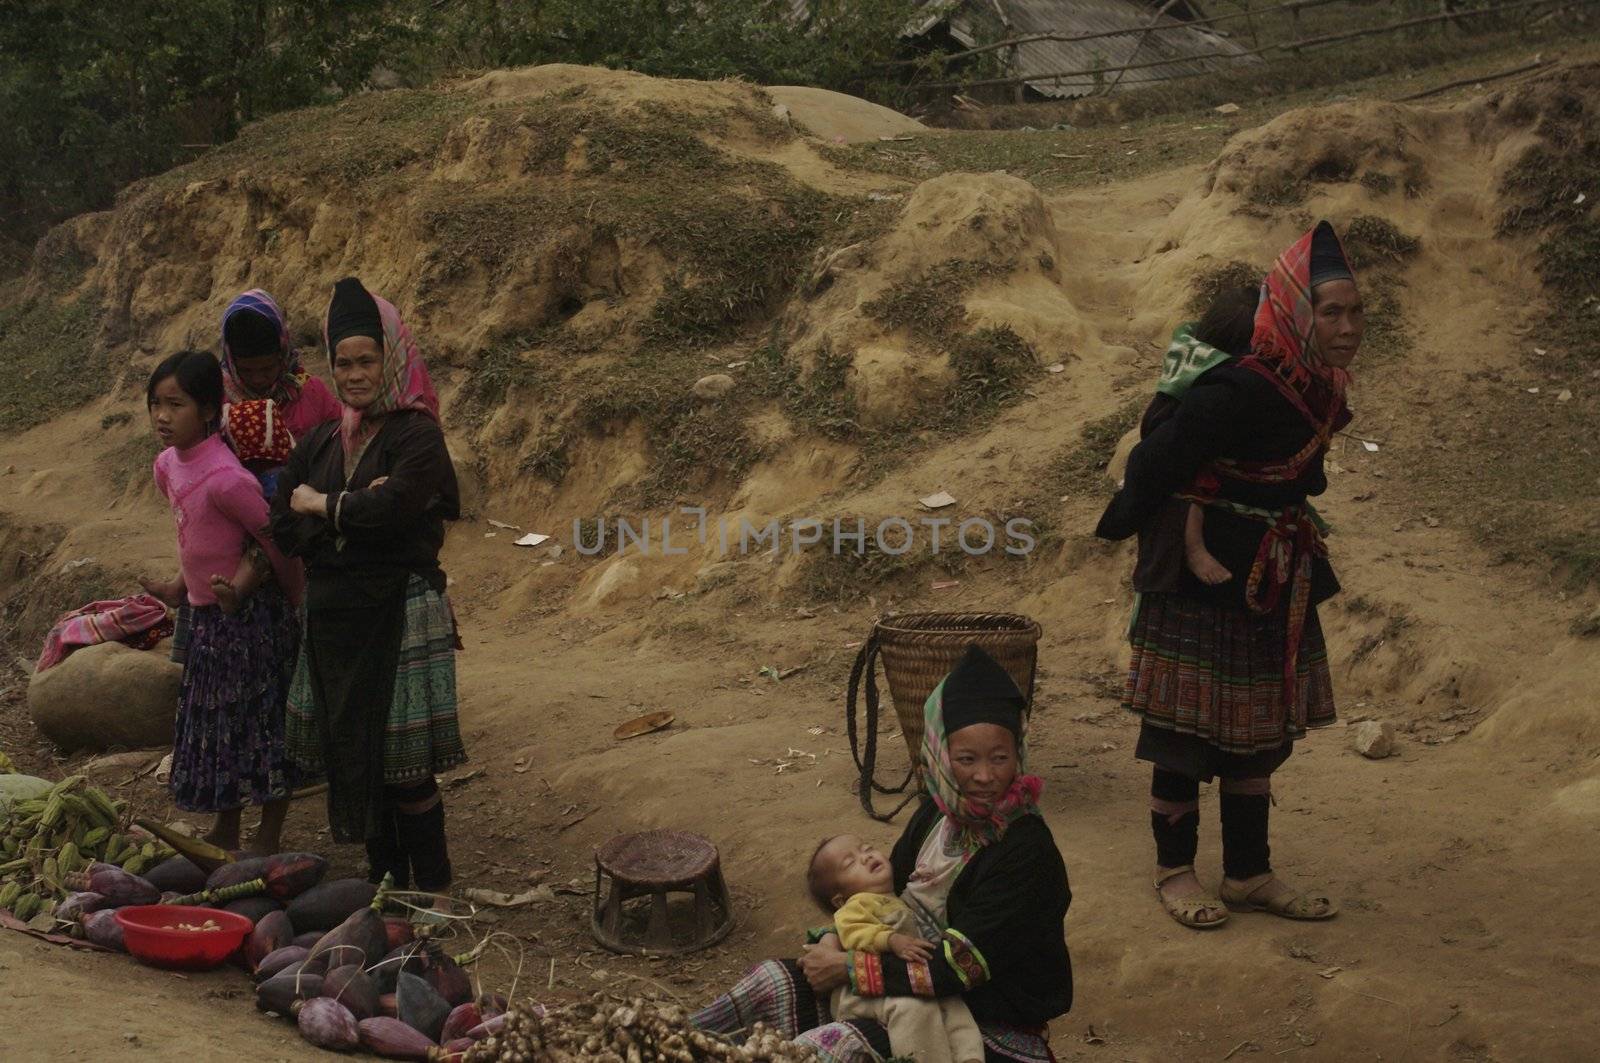 Along the road in front of the village women Phu La ethnic group sell their meager crops